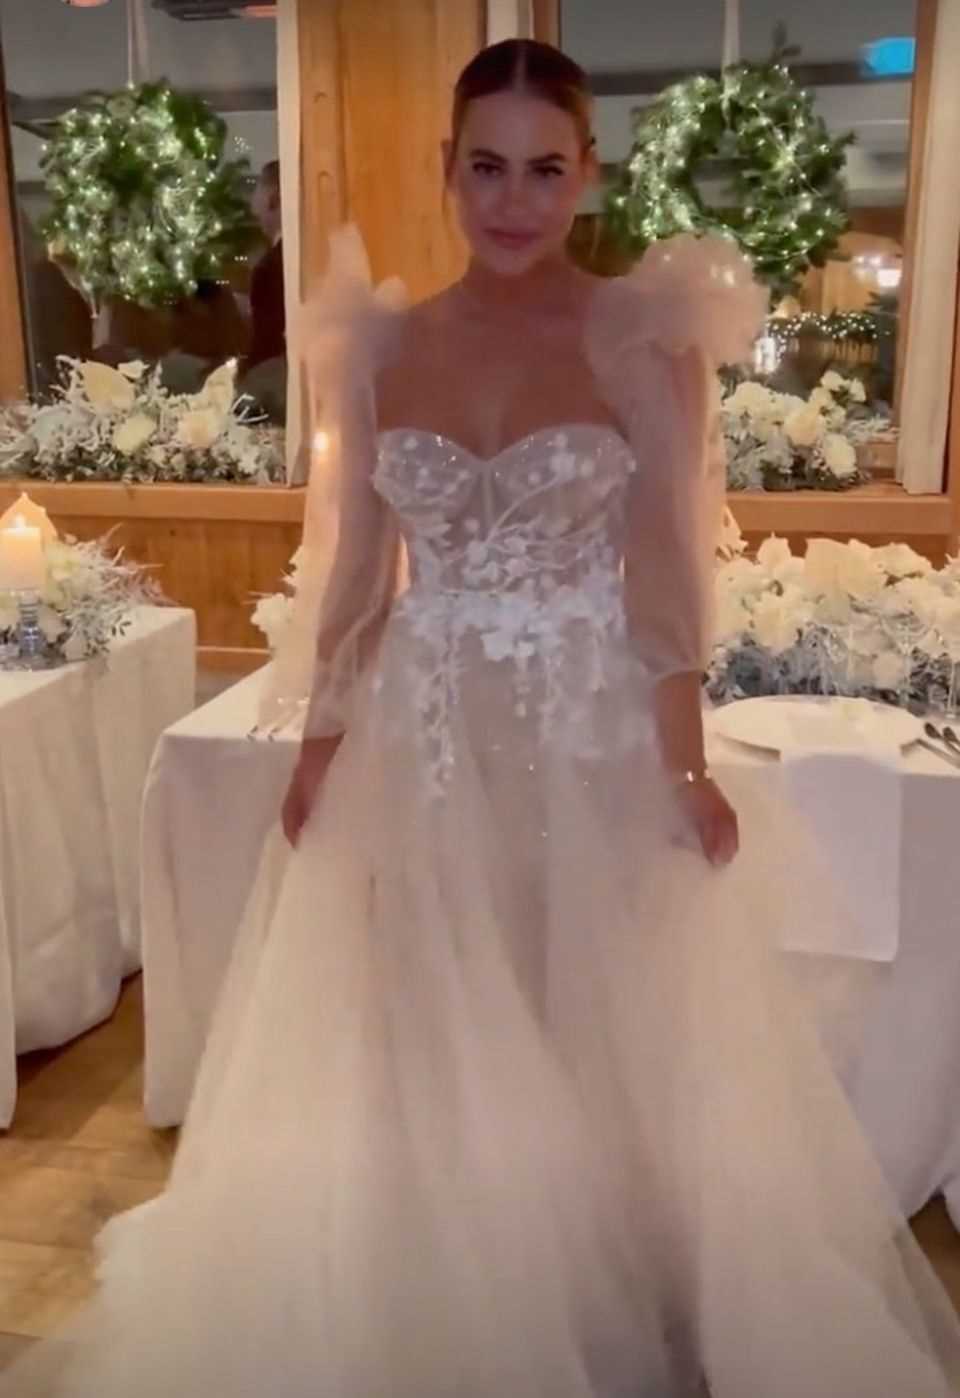 Jessica Paszka: In this dream dress she has "Yes" said